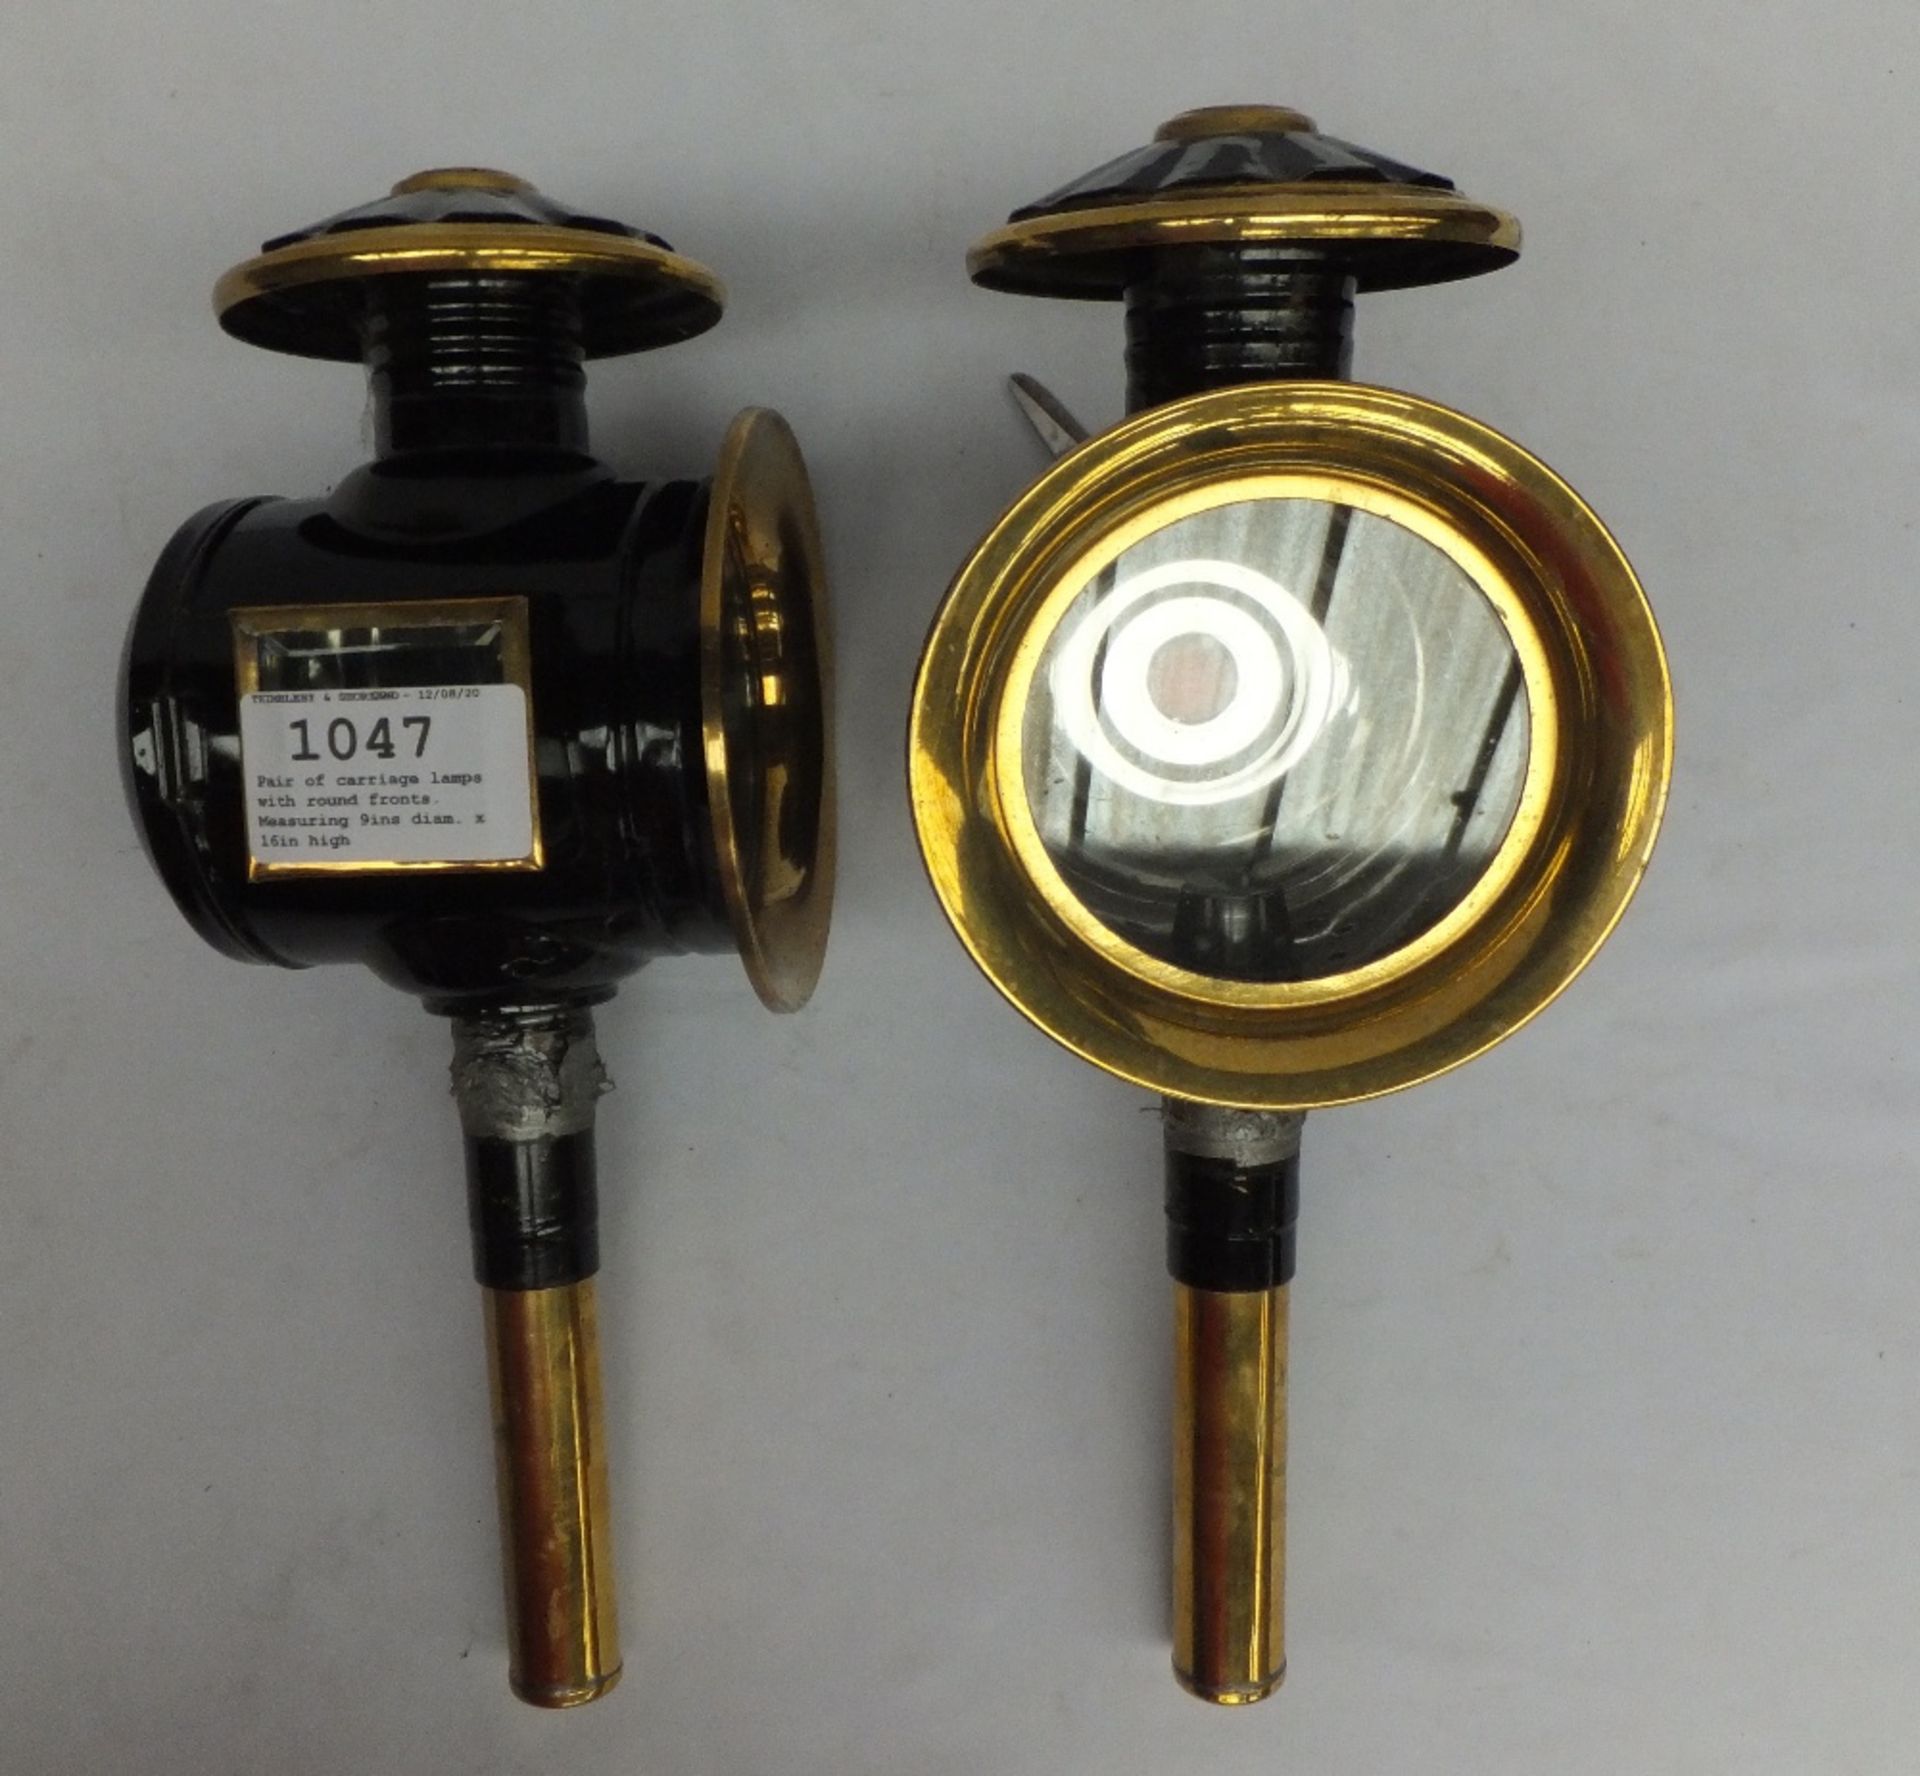 Pair of carriage lamps with round fronts. Measuring 9ins diam. x 16in high